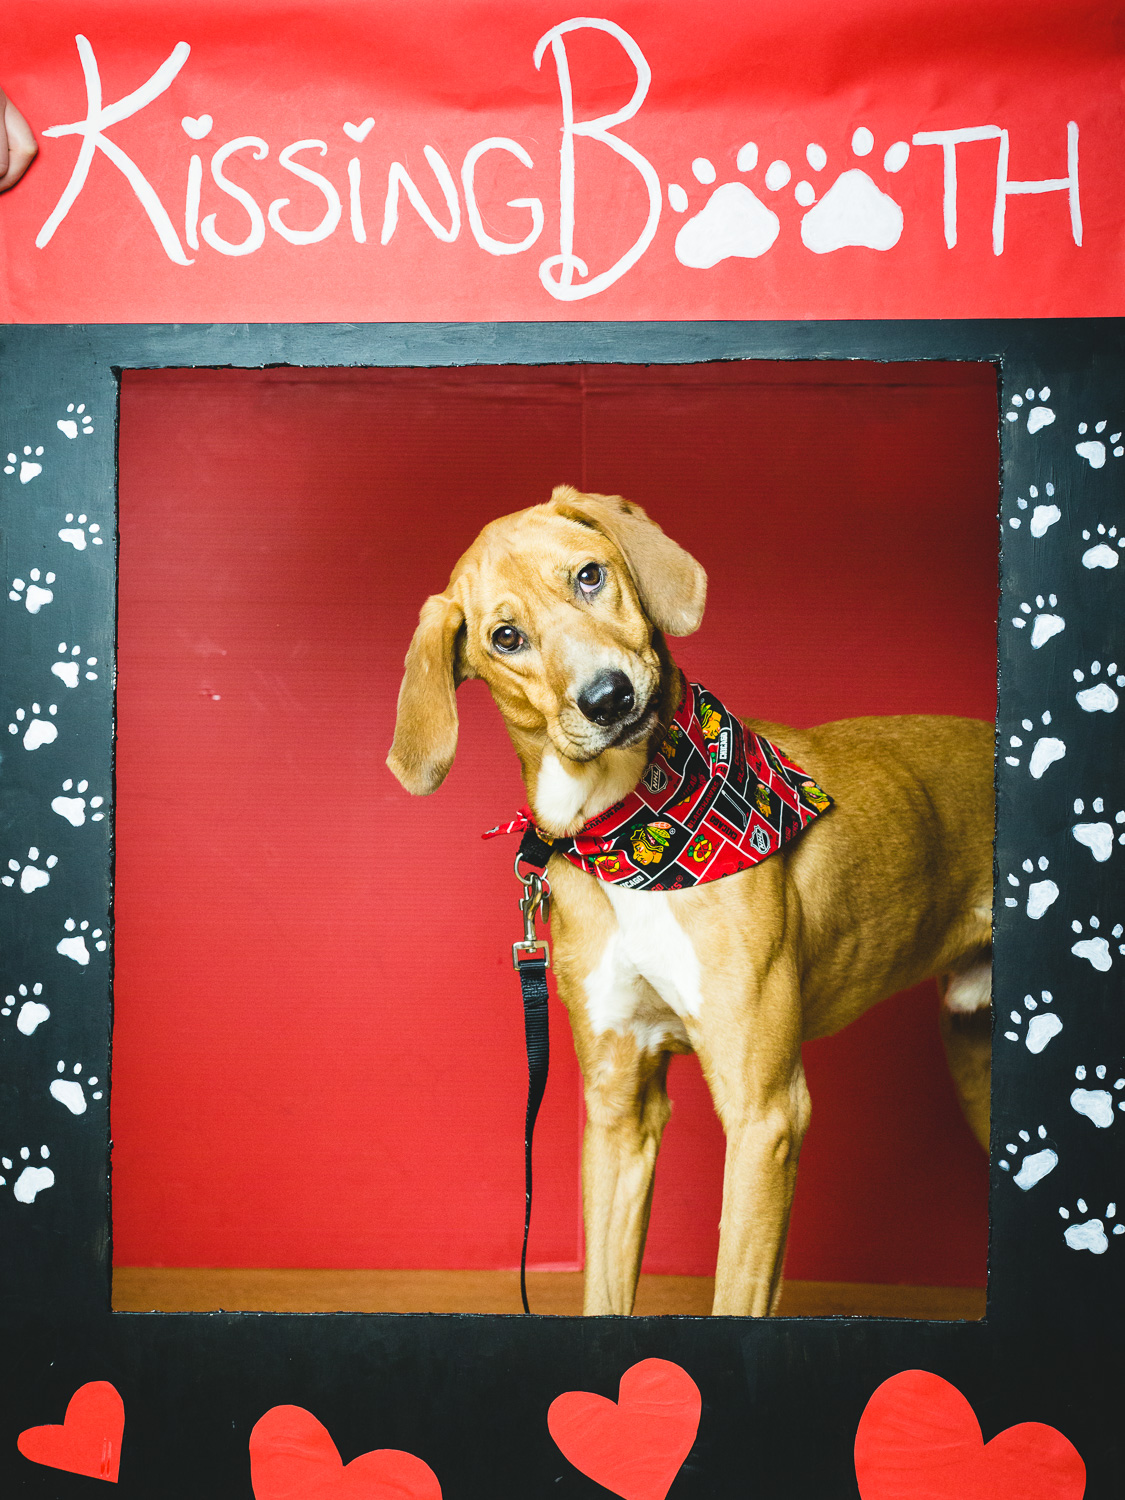 Dog Kissing Booth In Chicago